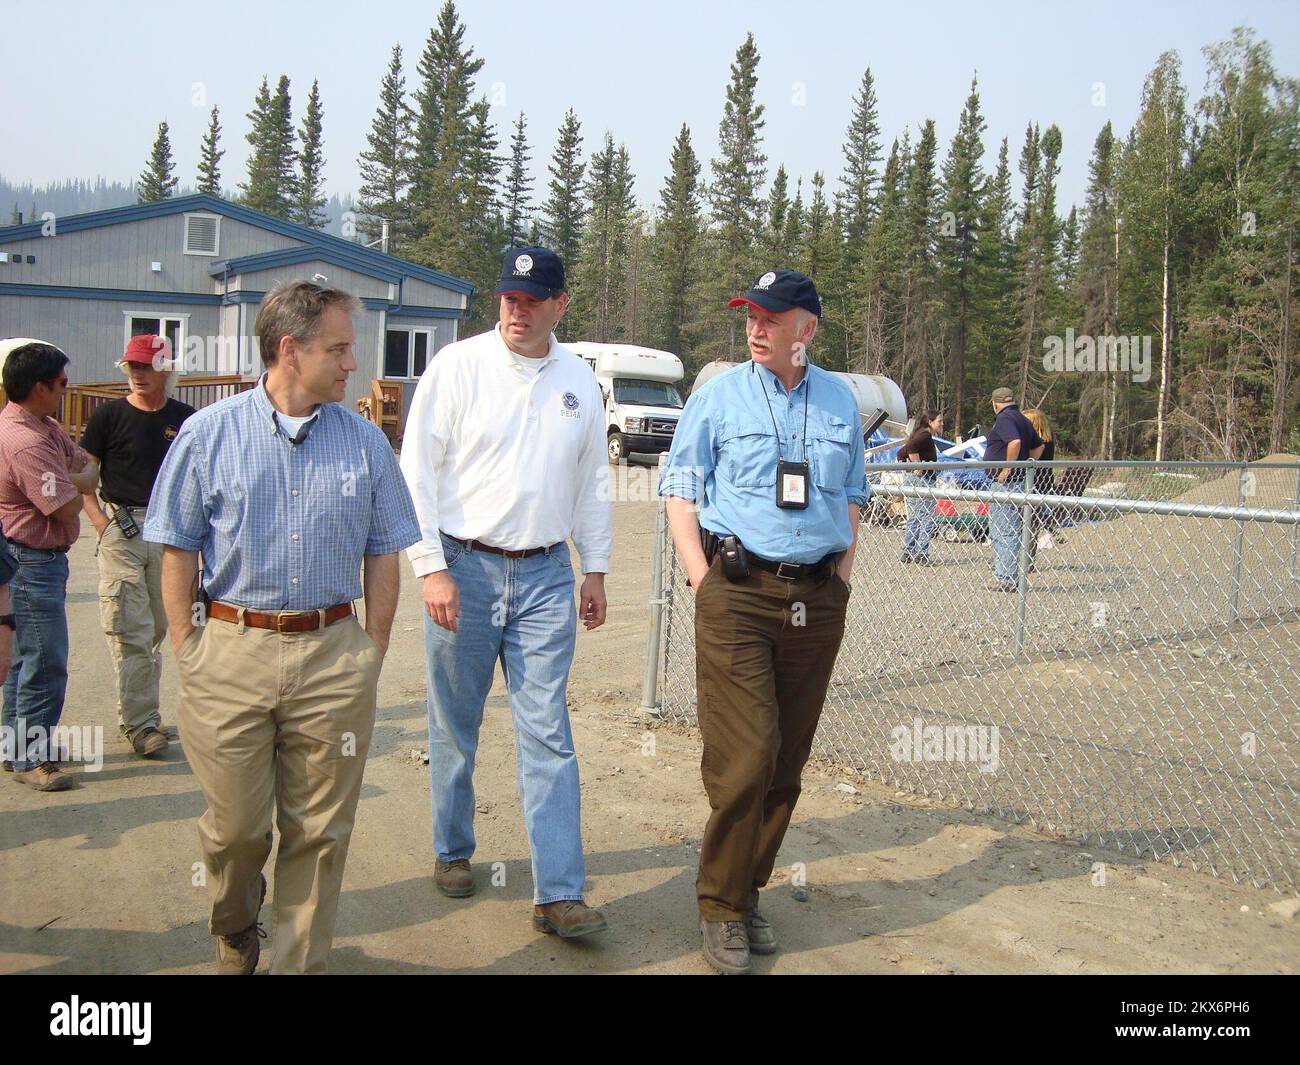 Flooding   Winter Storm - Eagle, Alaska, August 5, 2009   Alaska Governor Sean Parnell (left) is briefed by FEMA Federal Coordinating Officer Doug Mayne (center) and FEMA Operations Chief Robert Purcell (right) at the site where a new village clinic will be built in Eagle, AK. The old clinic was destroyed by the ice and flood of April 28 to May 31, 2009. - Jack Heesch/FEMA. Alaska Flooding and Ice Jams. Photographs Relating to Disasters and Emergency Management Programs, Activities, and Officials Stock Photo